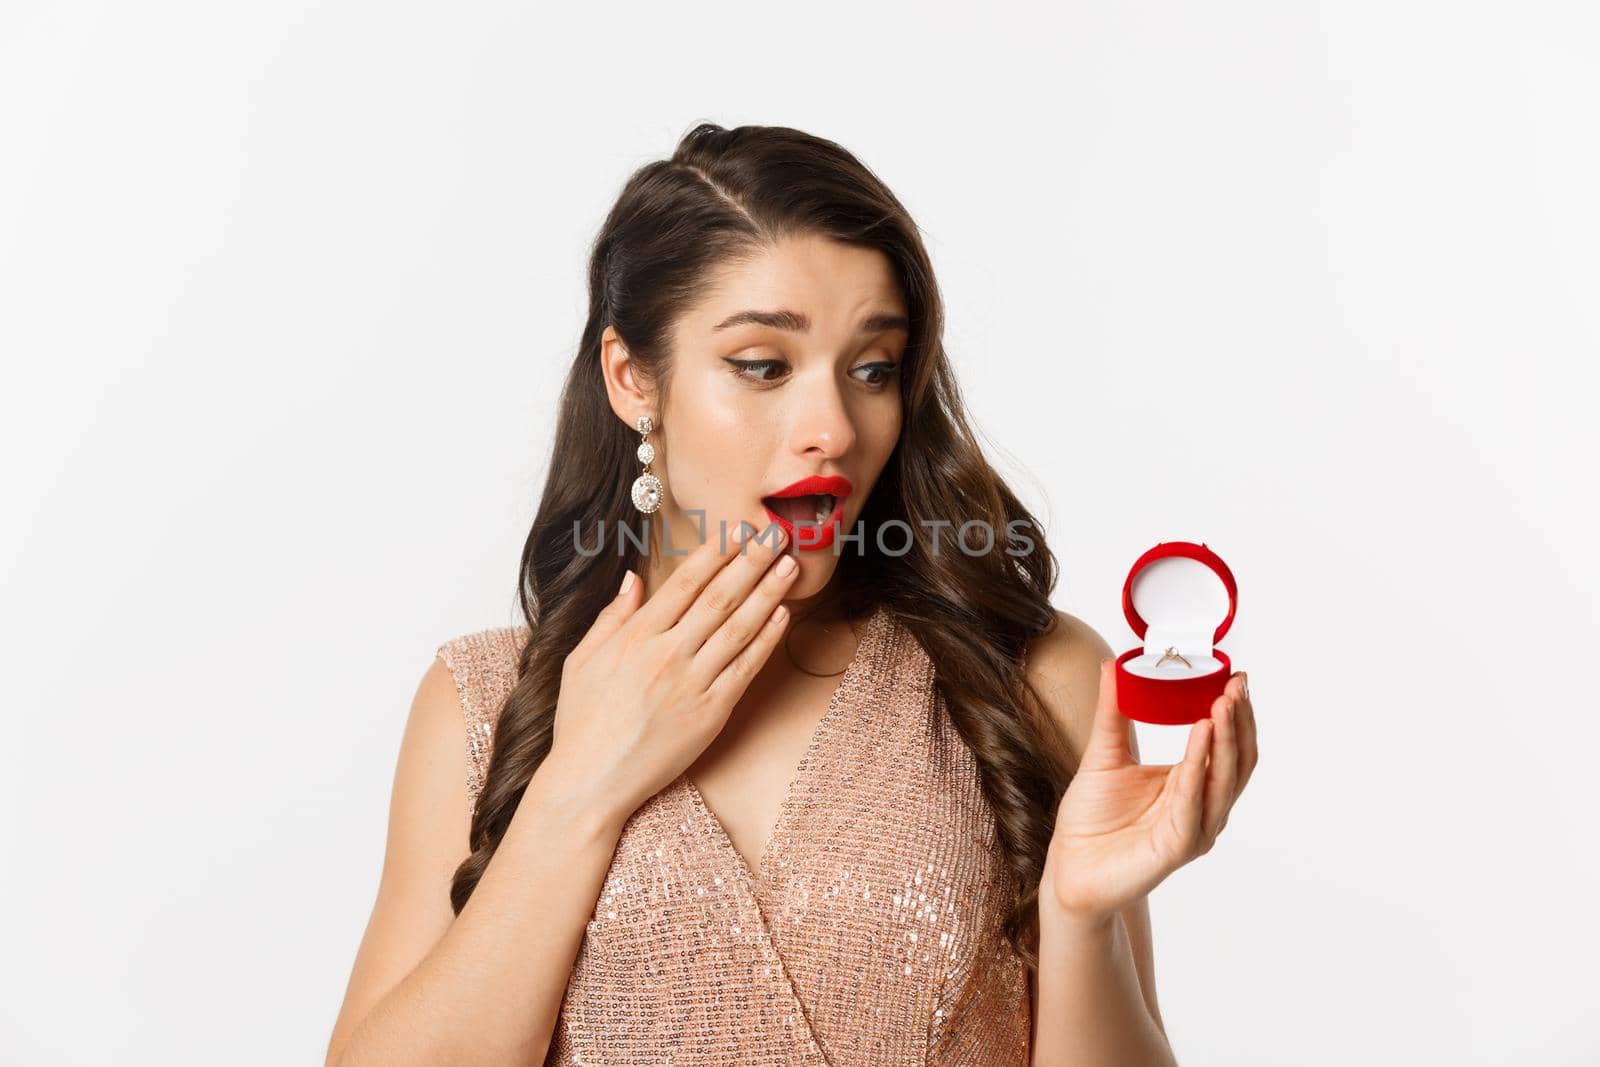 Surprised beautiful woman looking at engagement ring, feeling touched, receive marriage proposal, standing over white background.